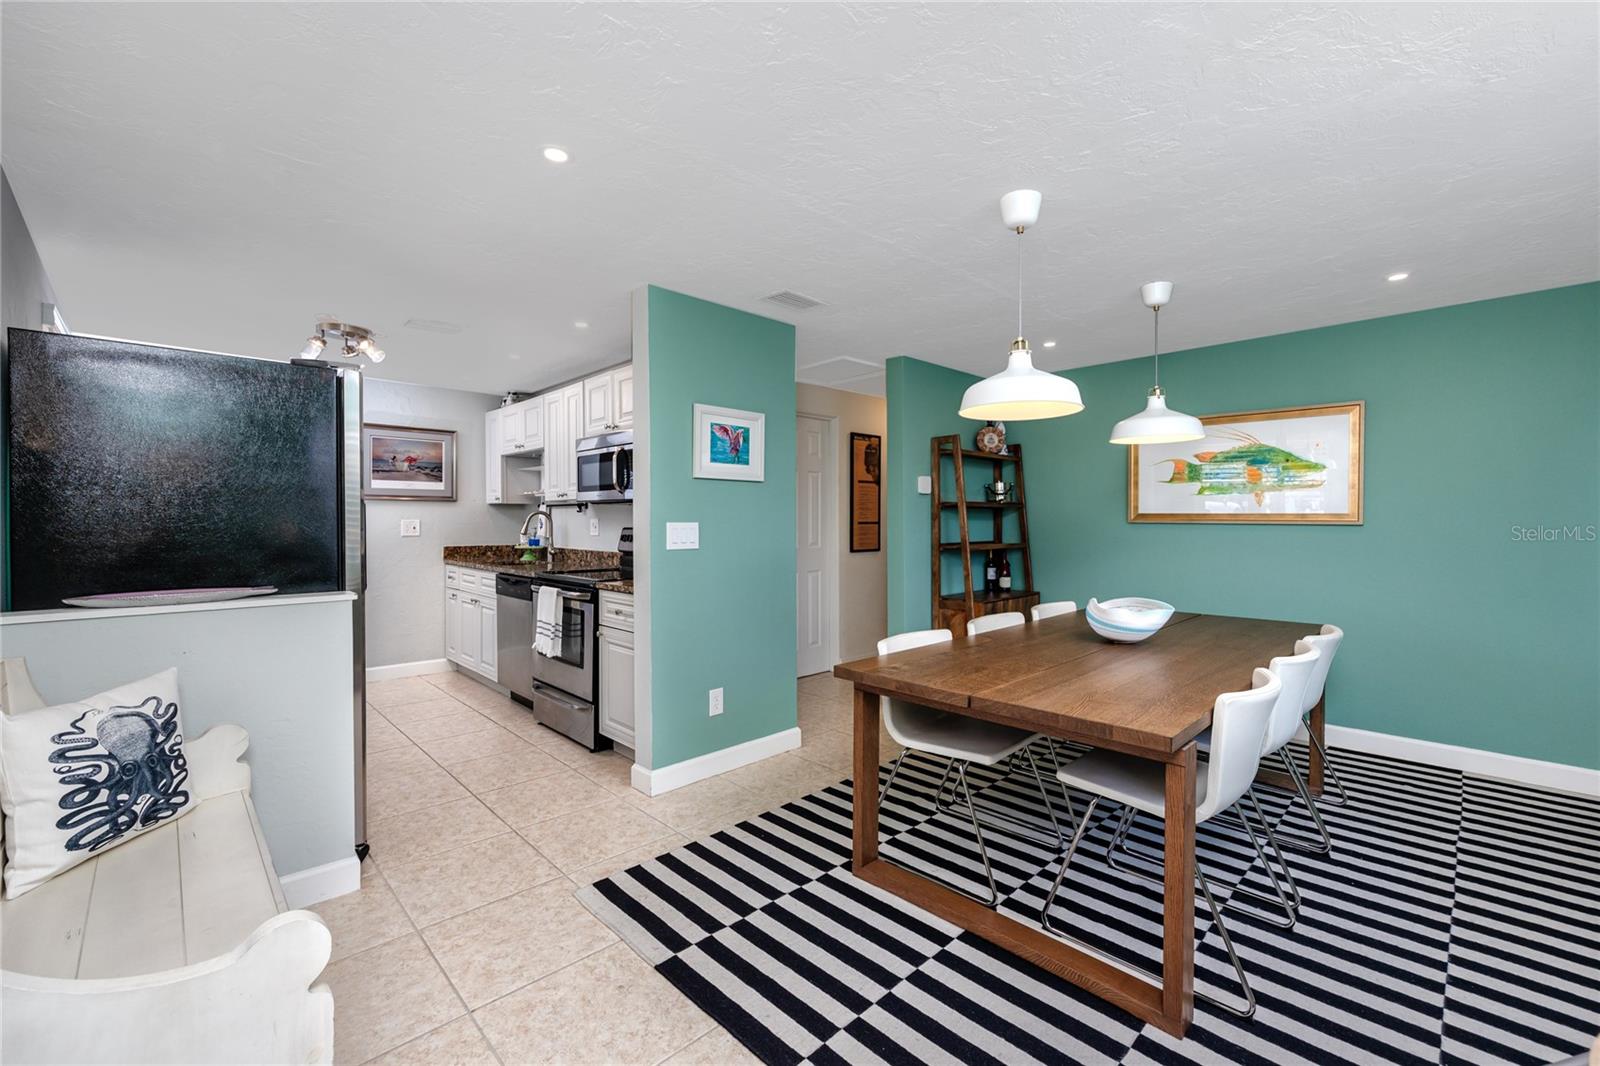 Centrally Located Kitchen For Ease of Entertaining